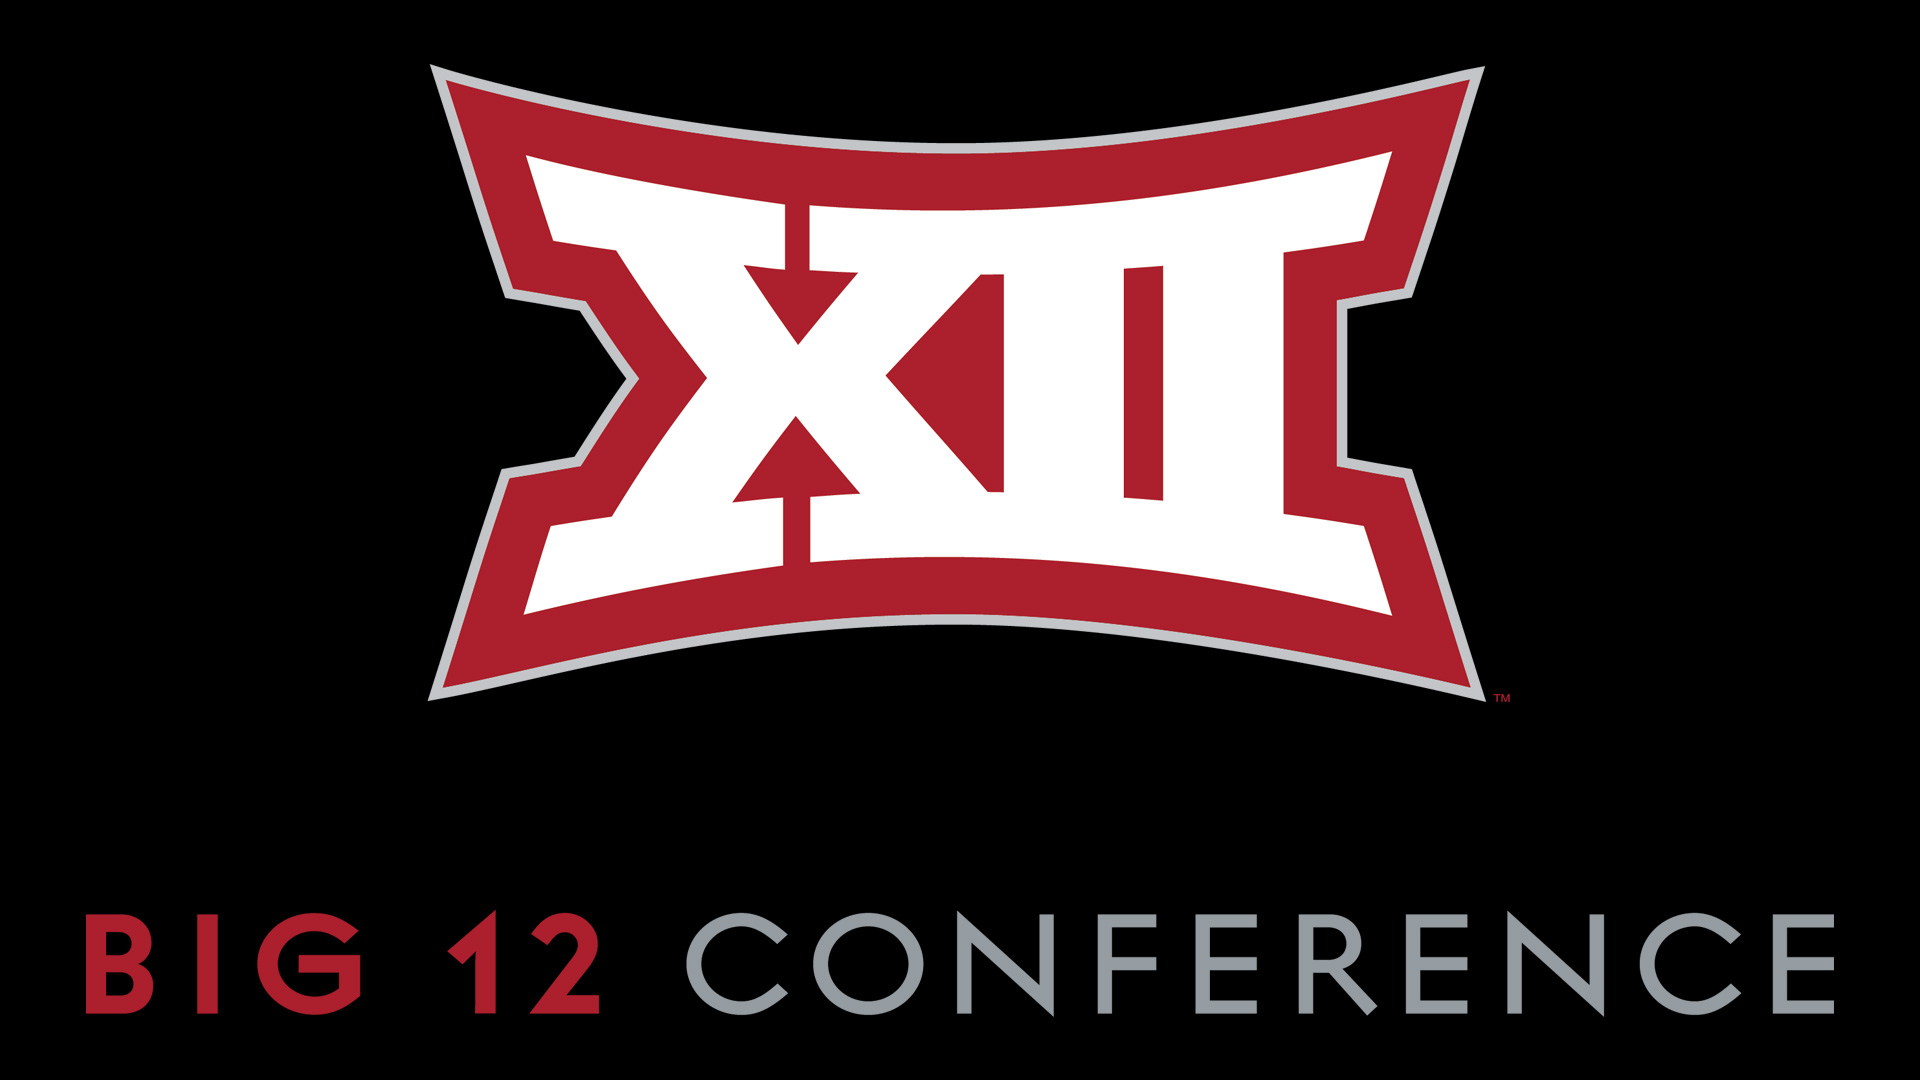 Big 12 Planning to Stay at 18 League Games When Conference Has 14 Teams in 23-24 and 24-25